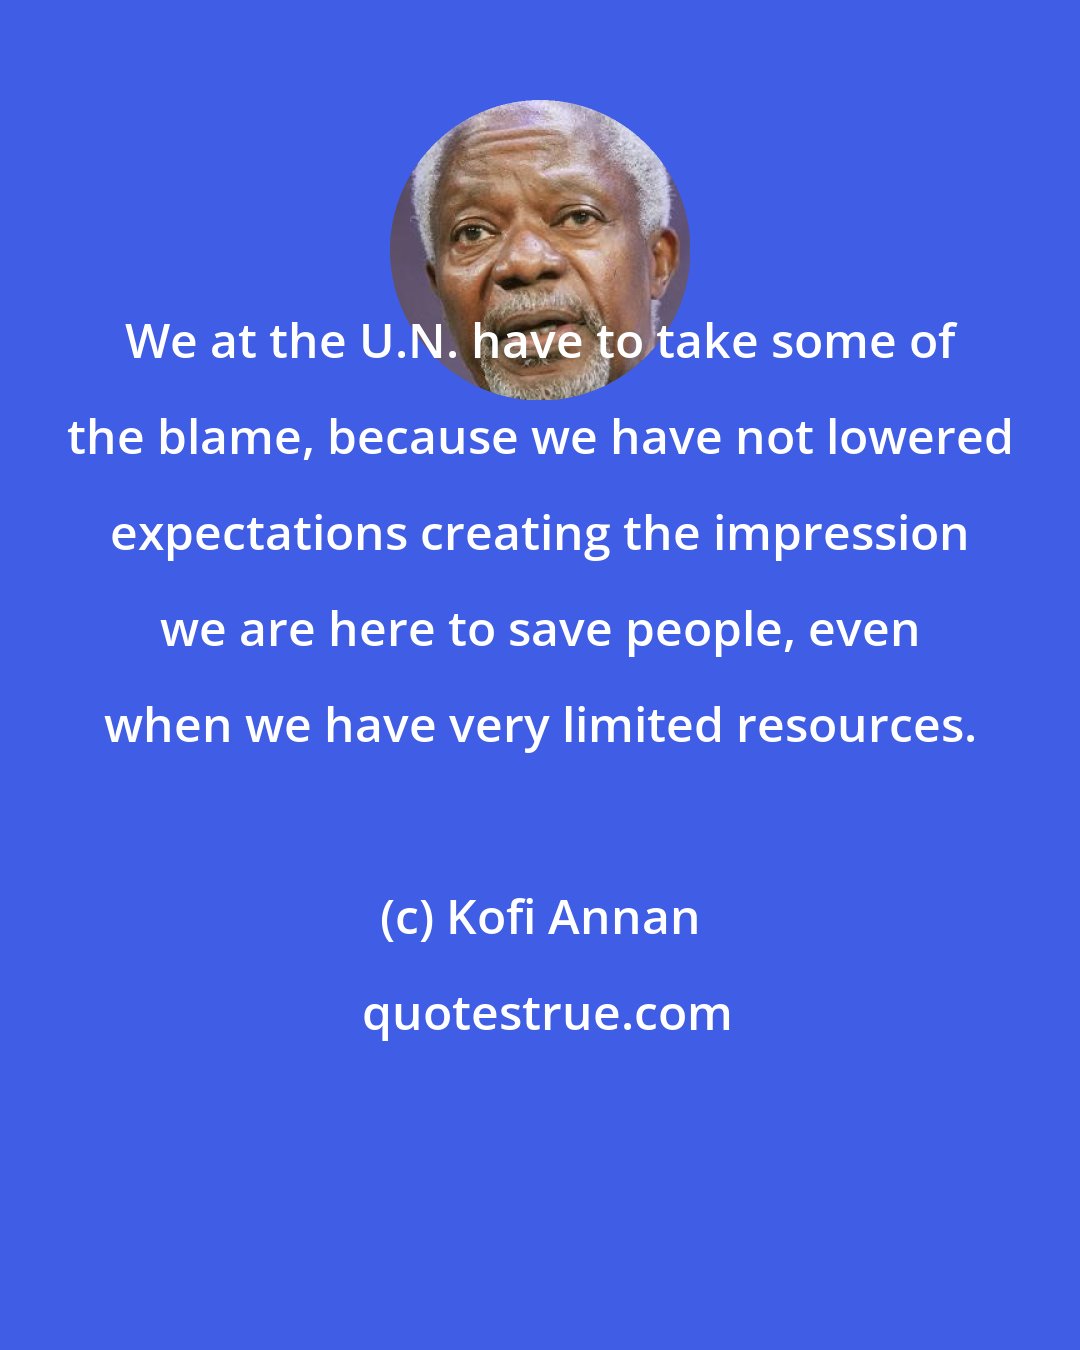 Kofi Annan: We at the U.N. have to take some of the blame, because we have not lowered expectations creating the impression we are here to save people, even when we have very limited resources.